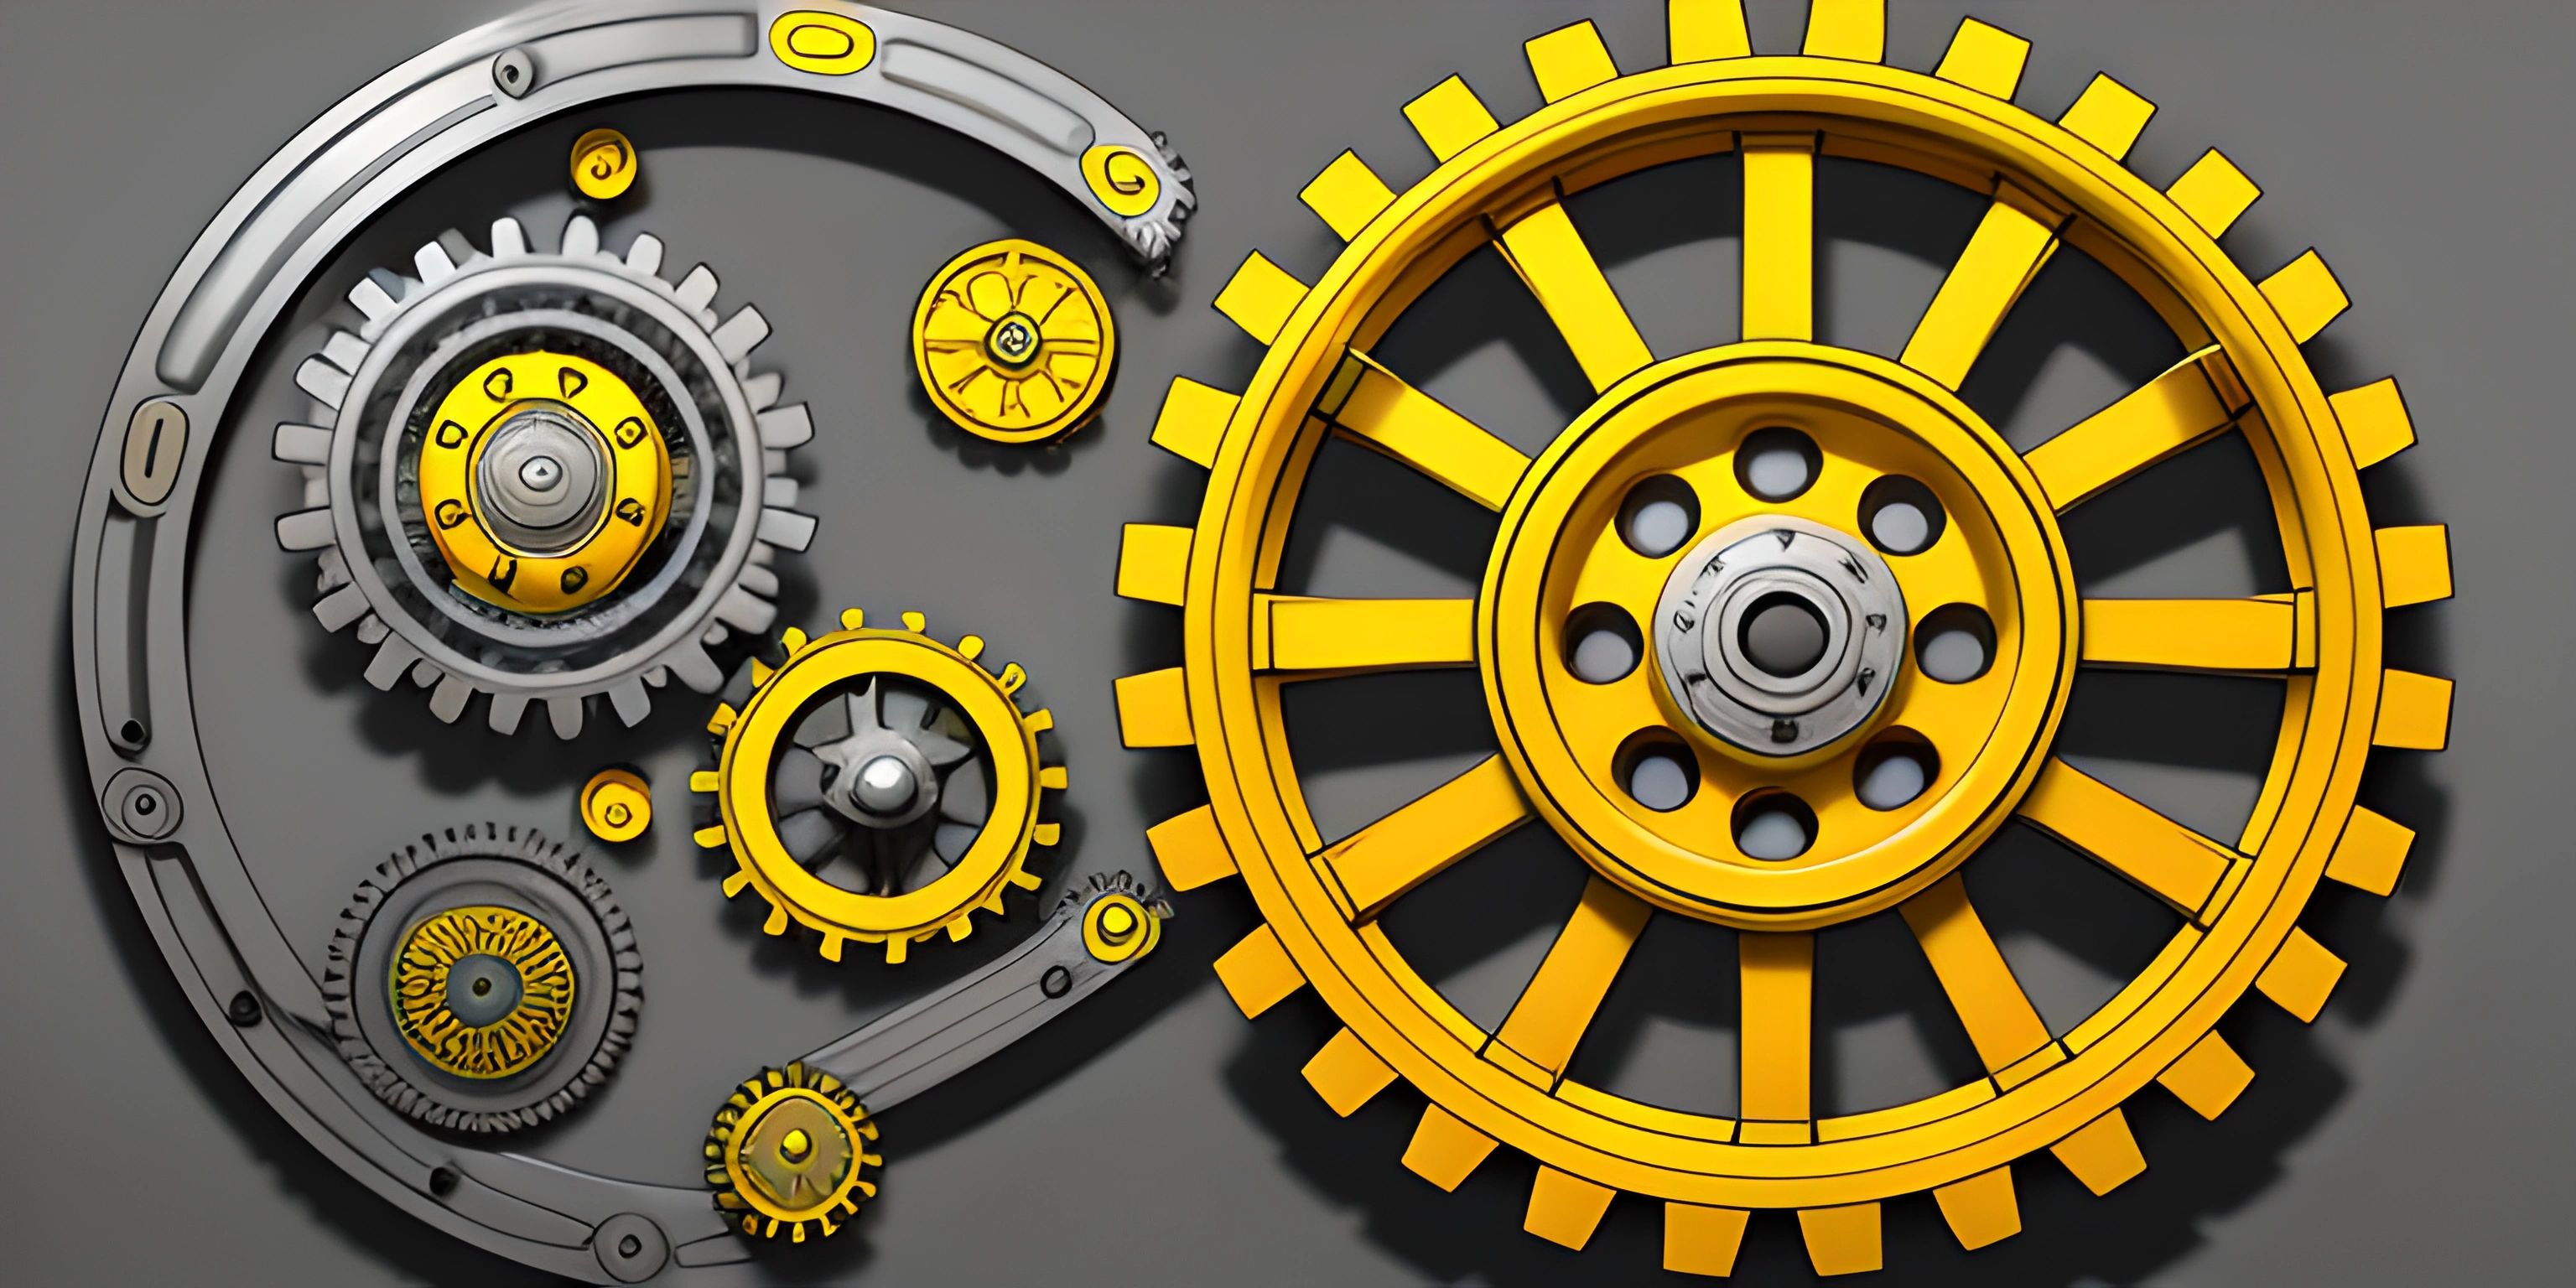 an assortment of gears are displayed in this very realistic illustration scheme illustration by cjr